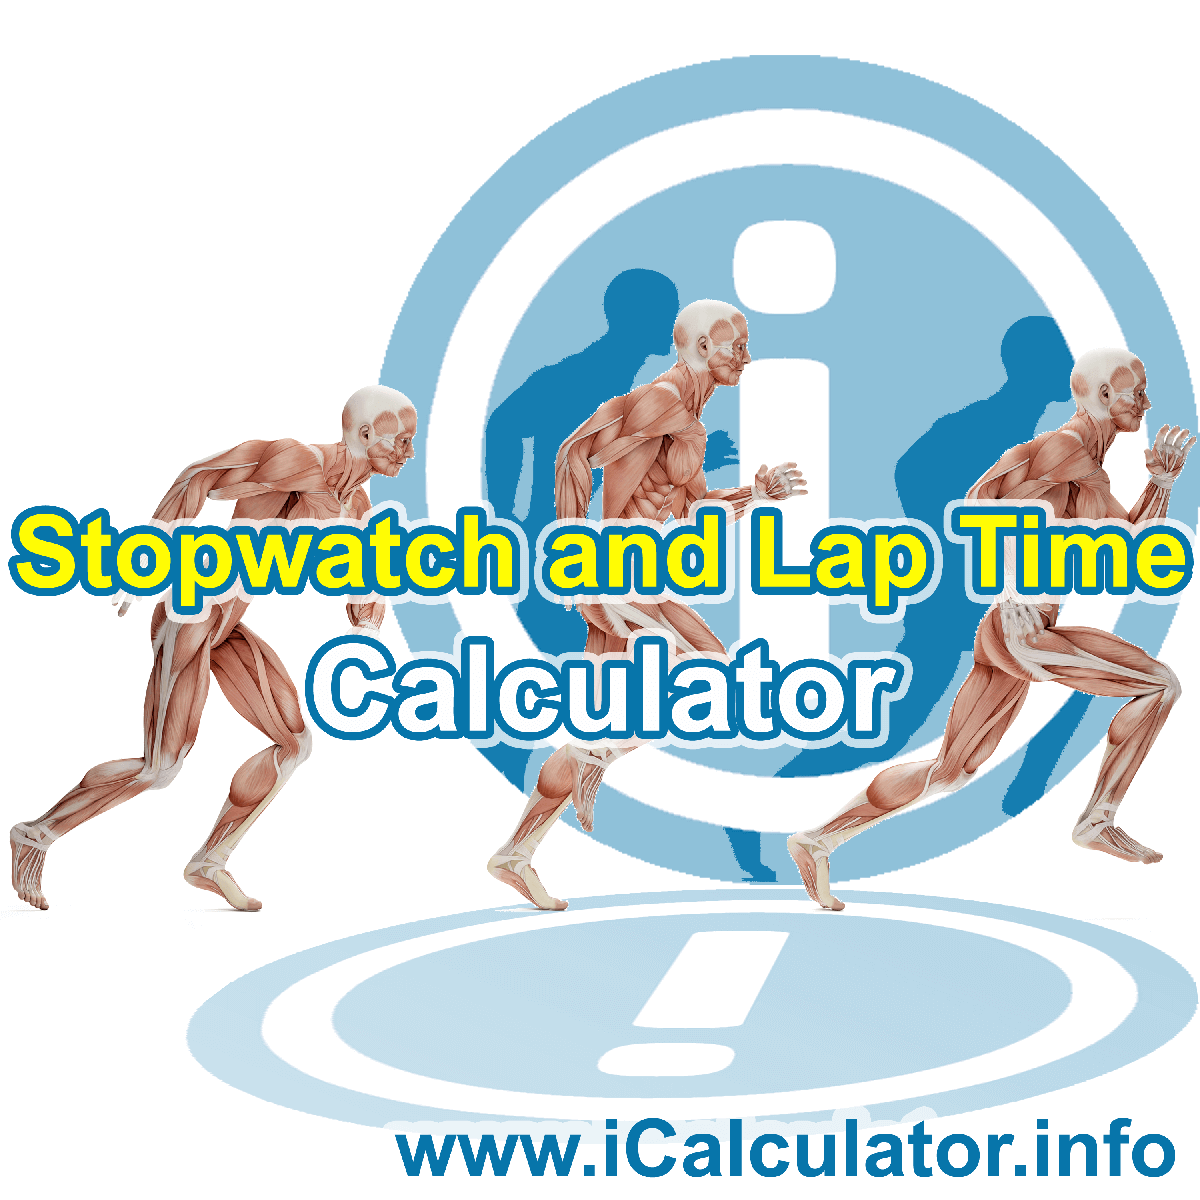 This image shows details about the online sports stopwatch and lap time formula used to calculate lap speed, lap time and totoal workout durations on the sports stopwatch and lap time Calculator by iCalculator